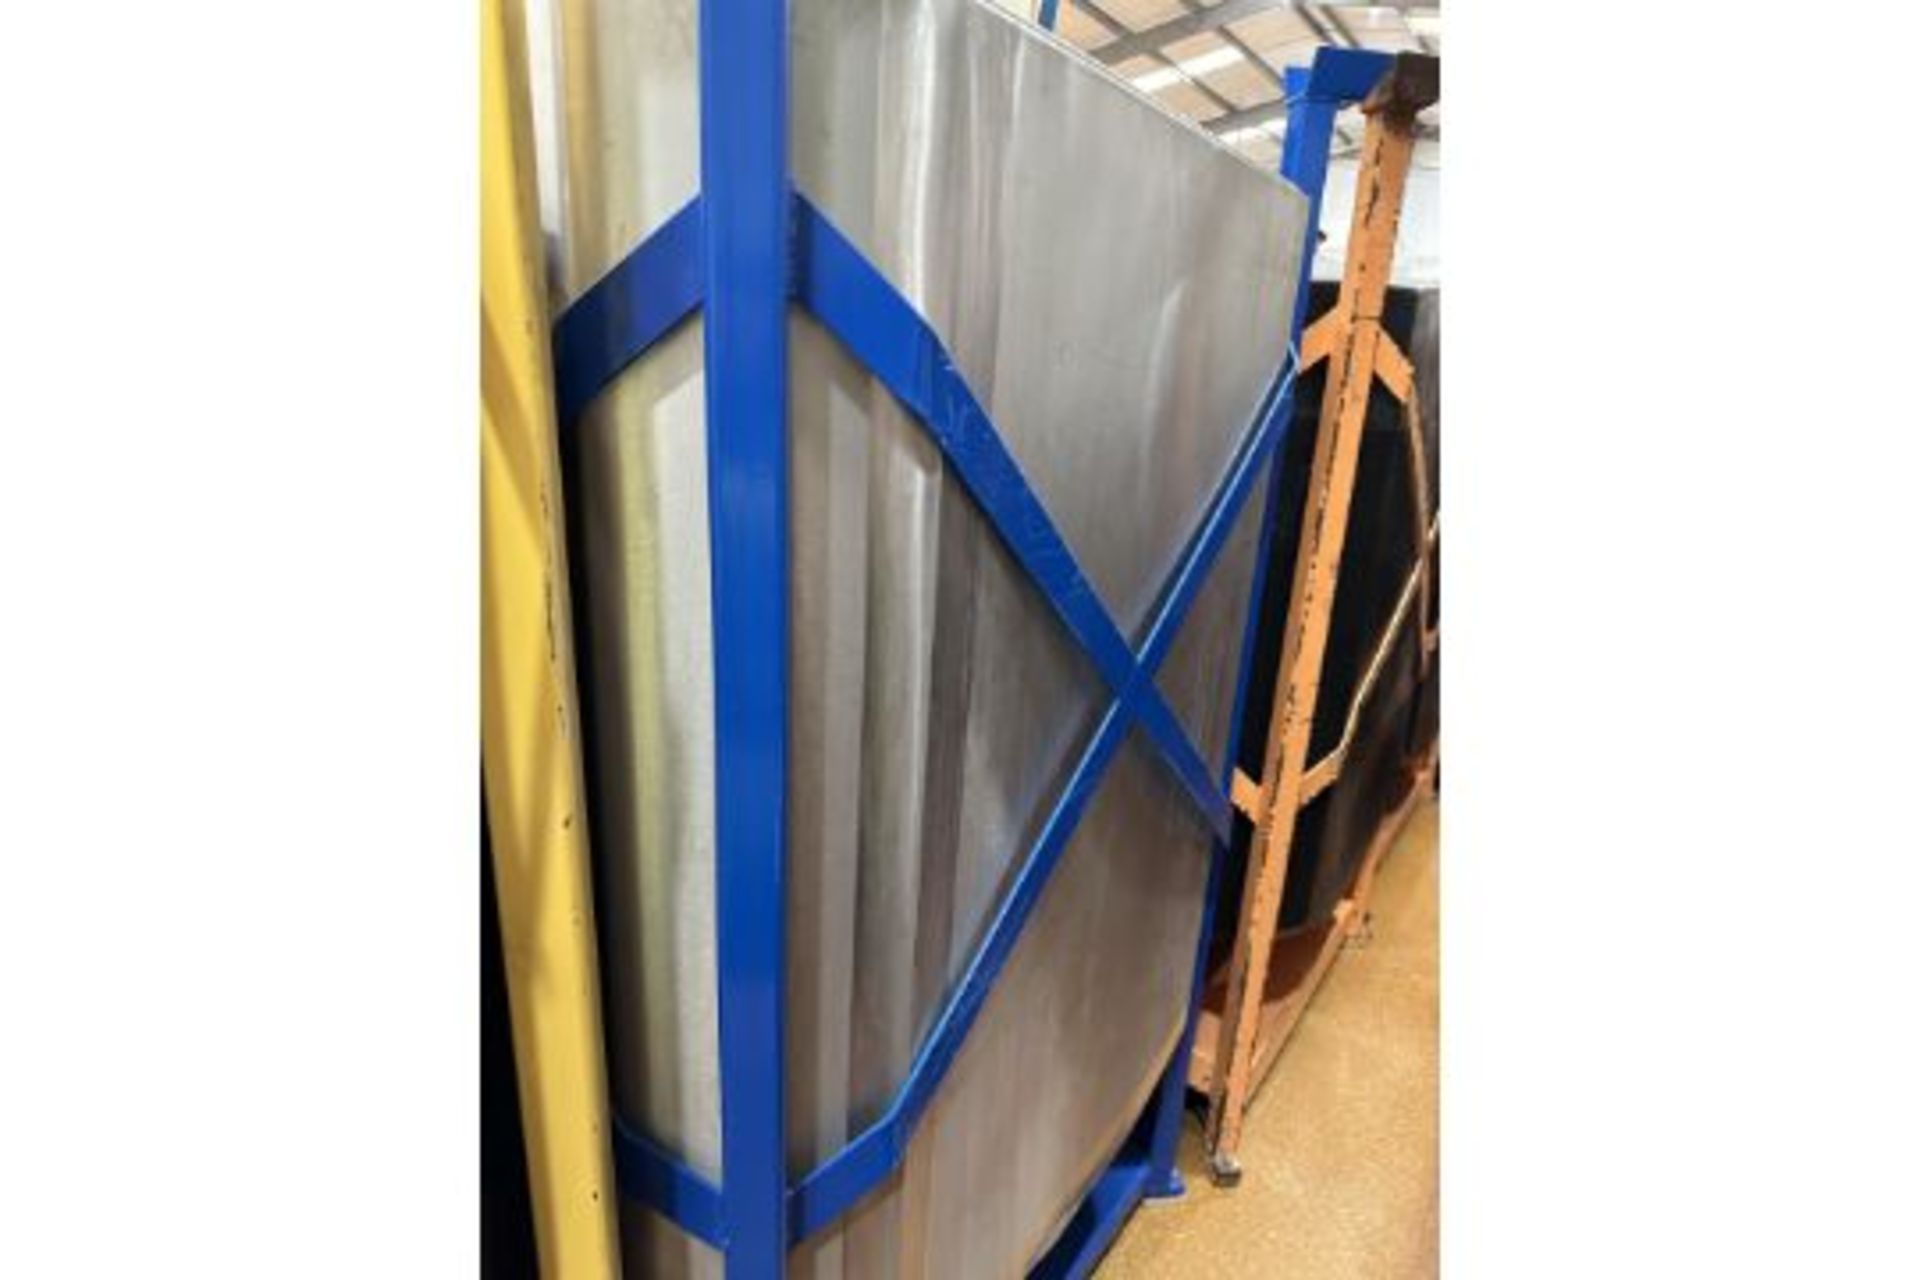 5 X FORKLIFTABLE FRAMES EACH HOLDING A S/S BIN. - Image 4 of 5